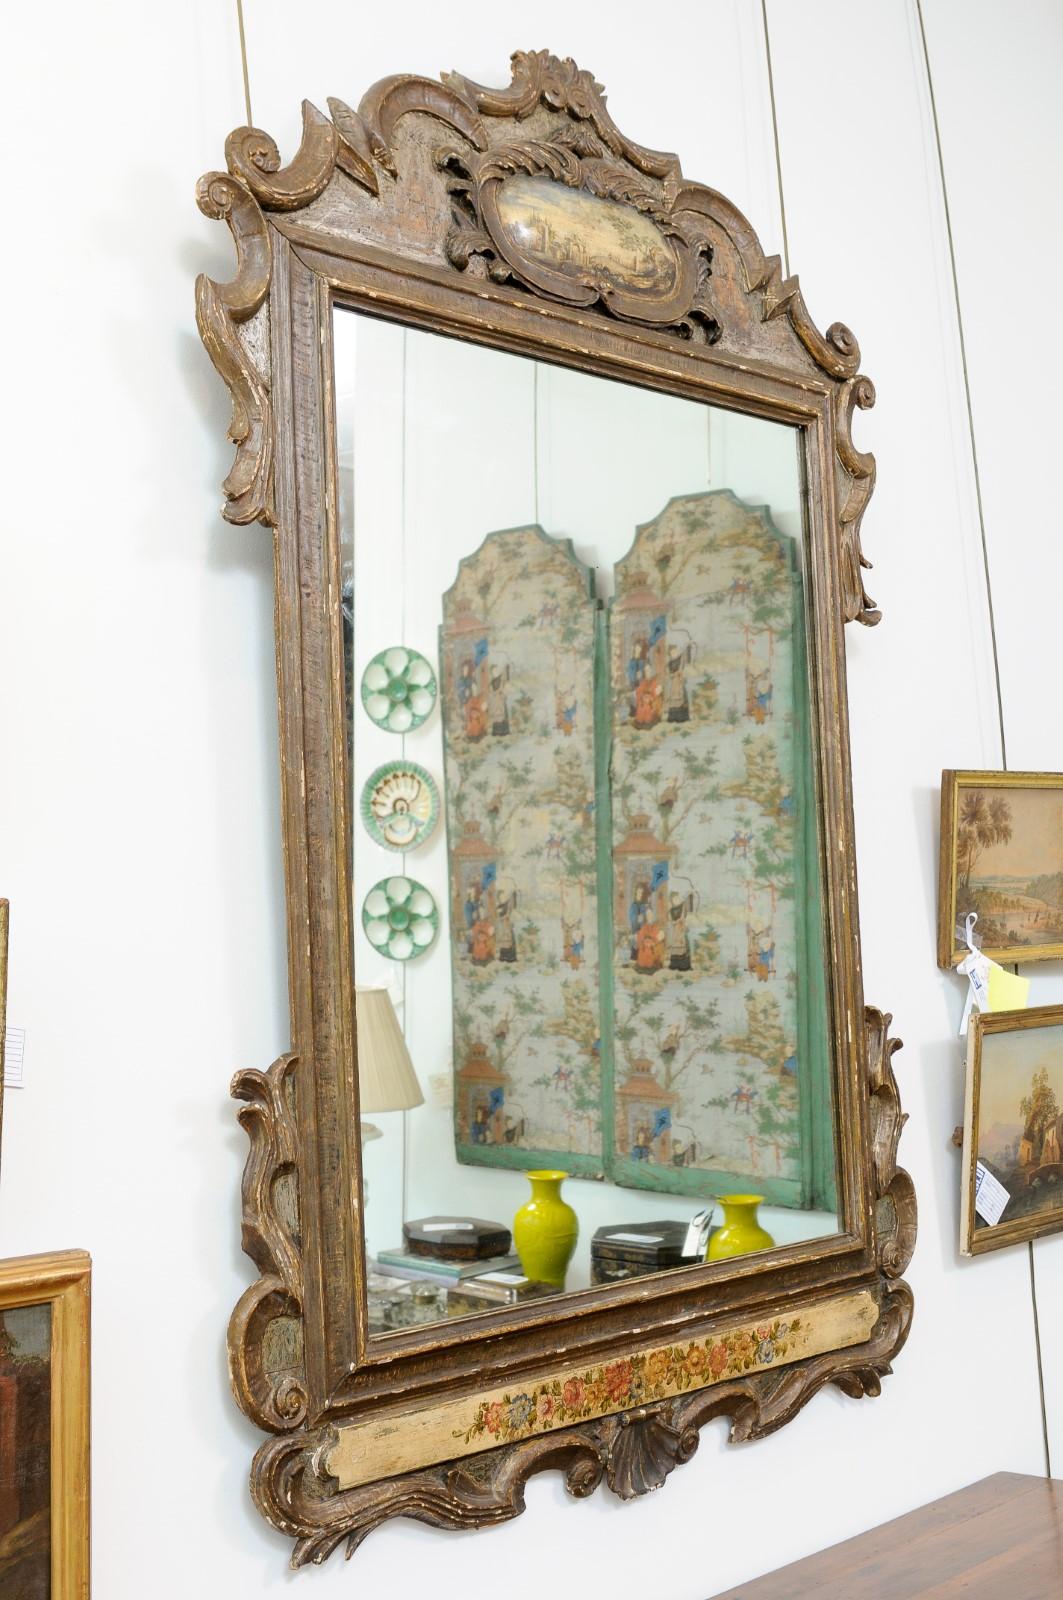 Early 18th Century Italian Baroque Silvered & Polychrome Painted Mirror For Sale 6